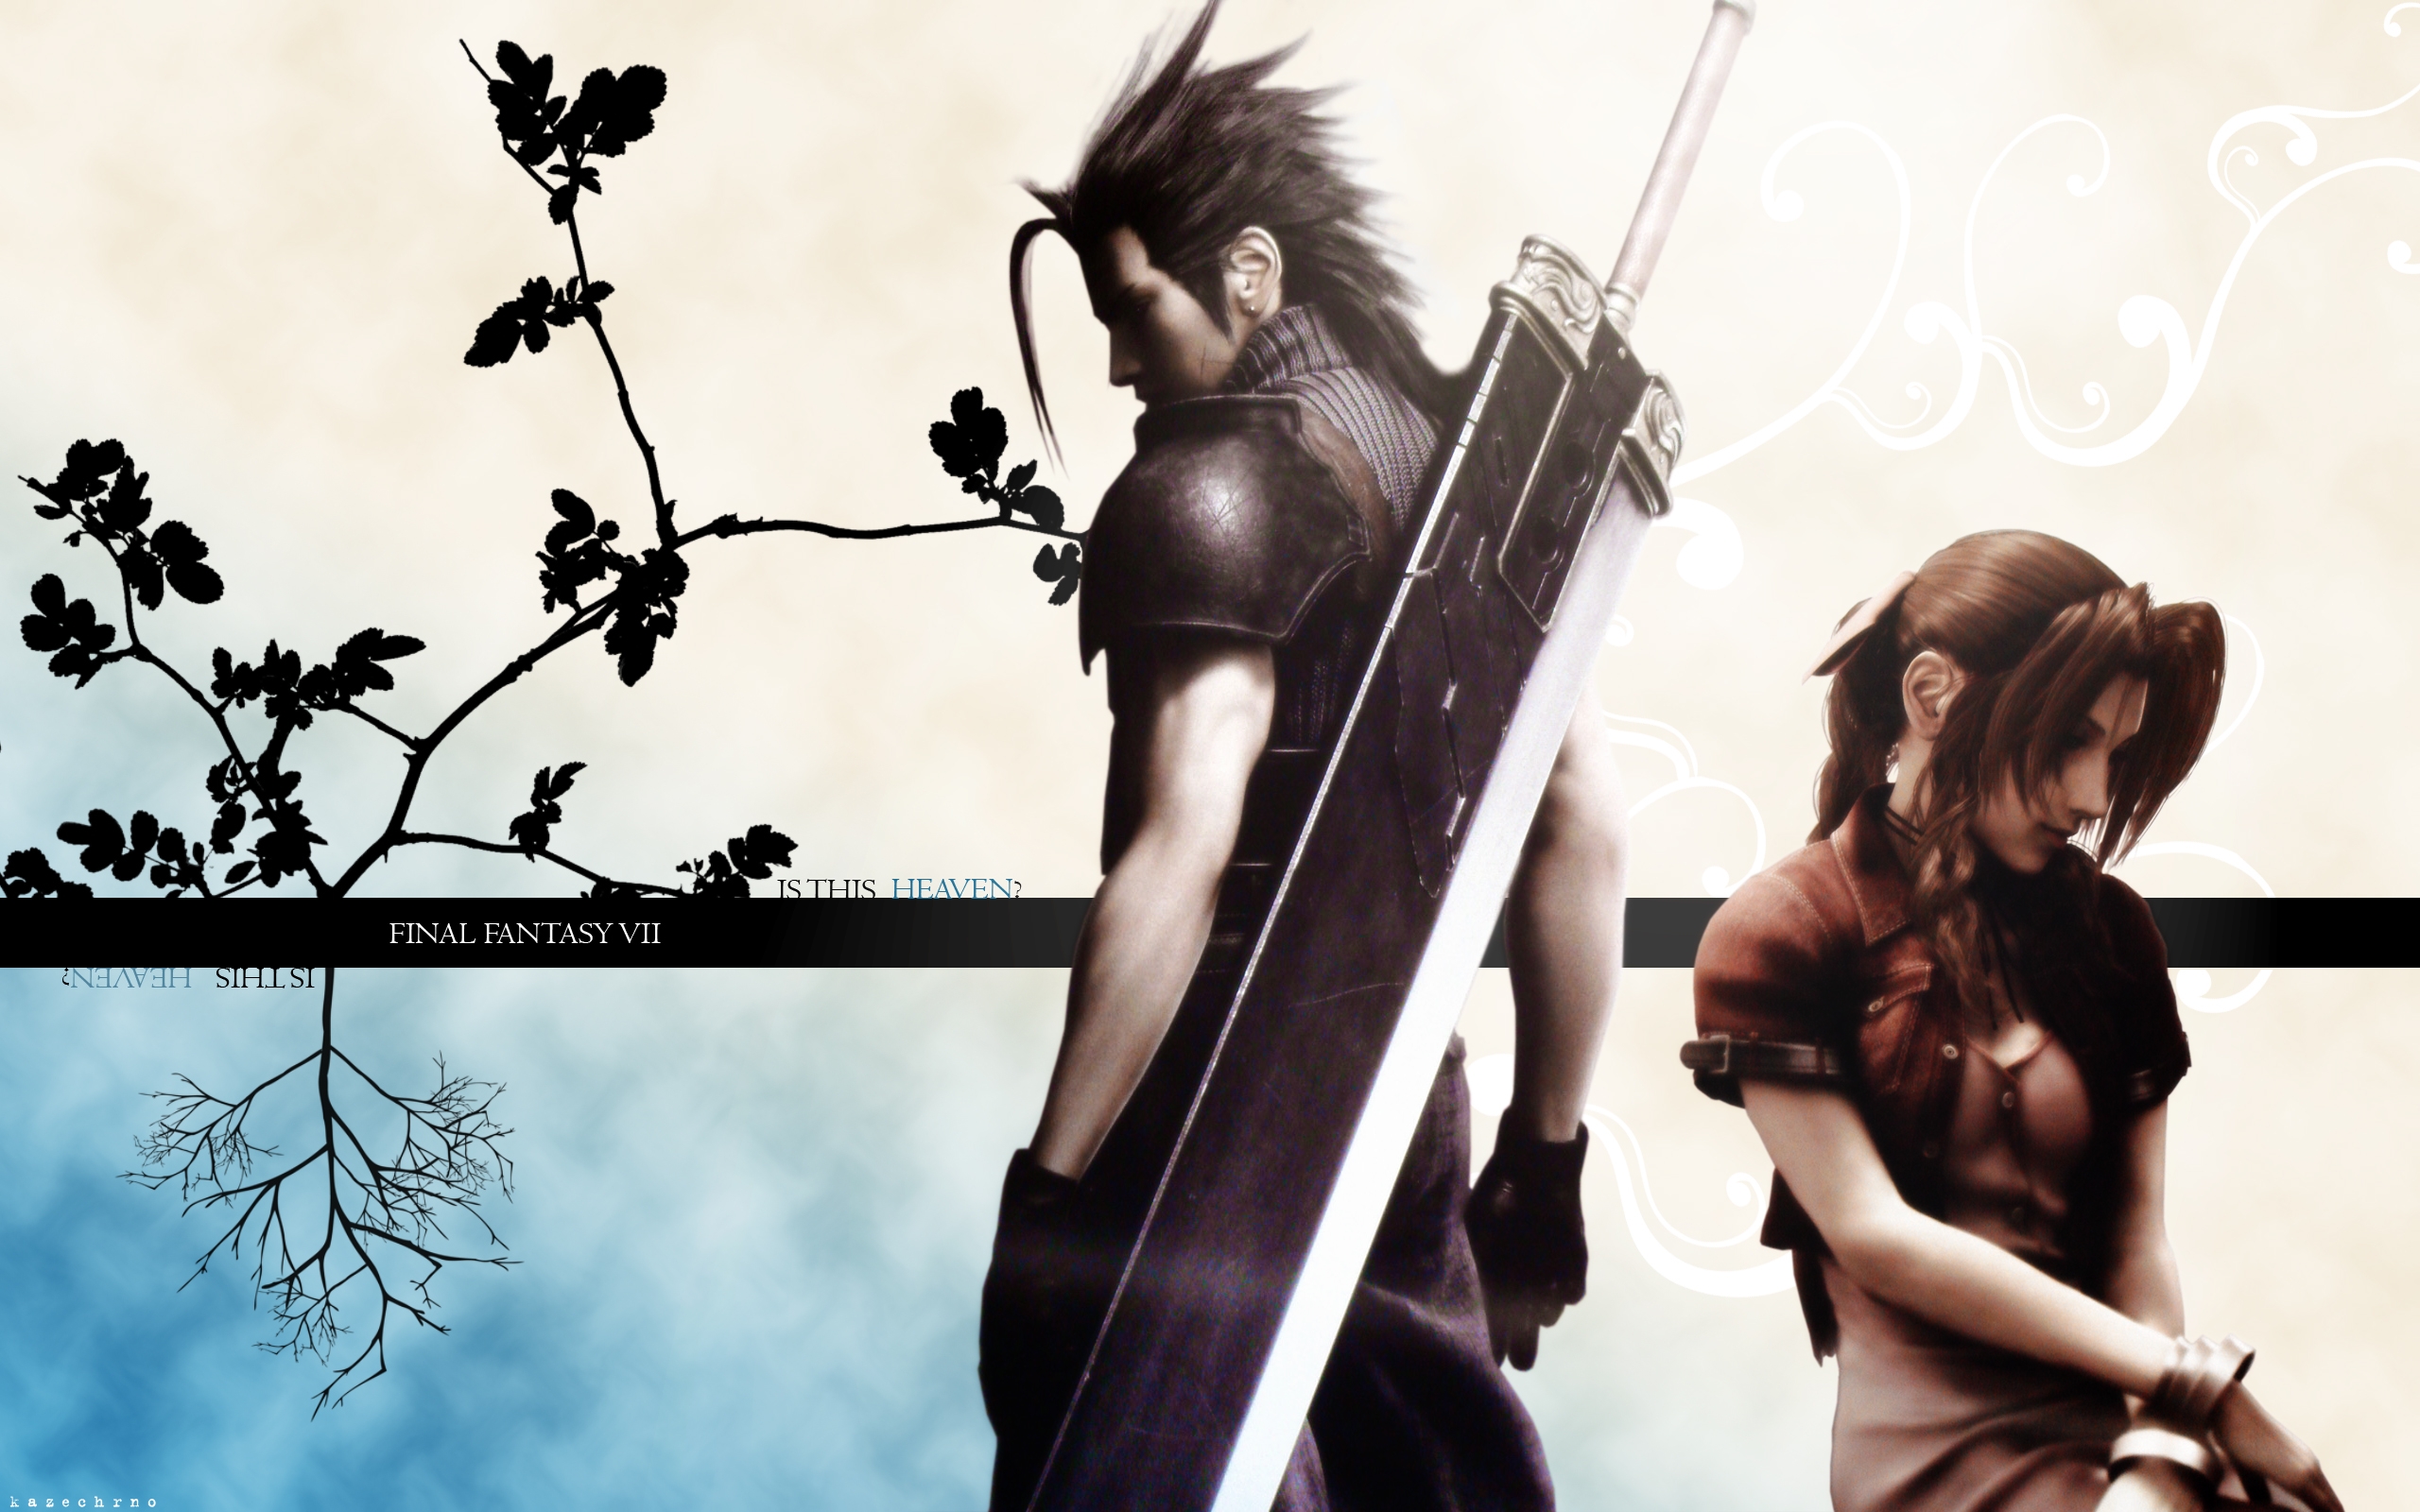  wallpapers of Final Fantasy VII You are downloading Final Fantasy VII